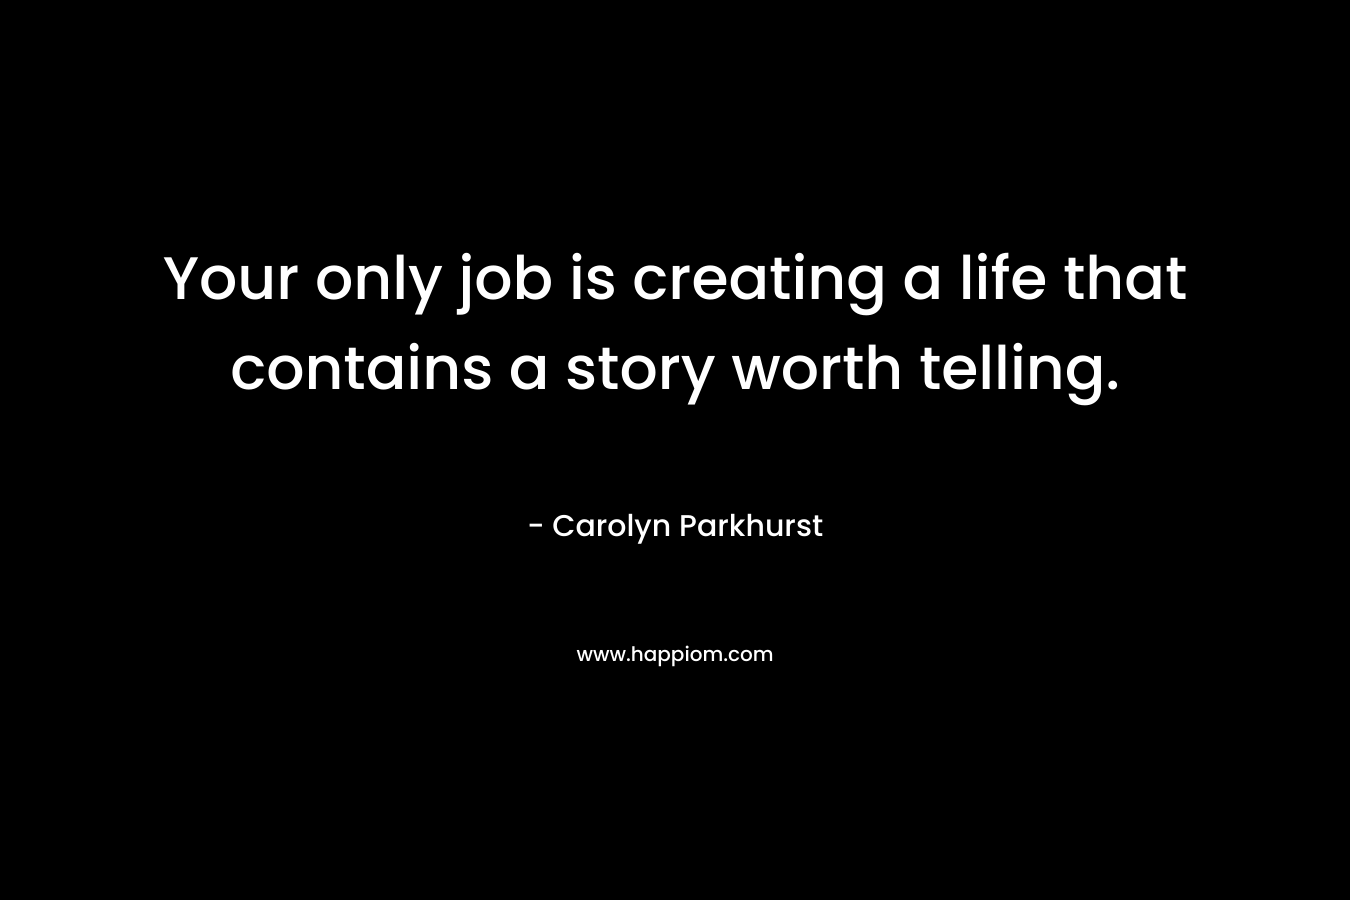 Your only job is creating a life that contains a story worth telling.